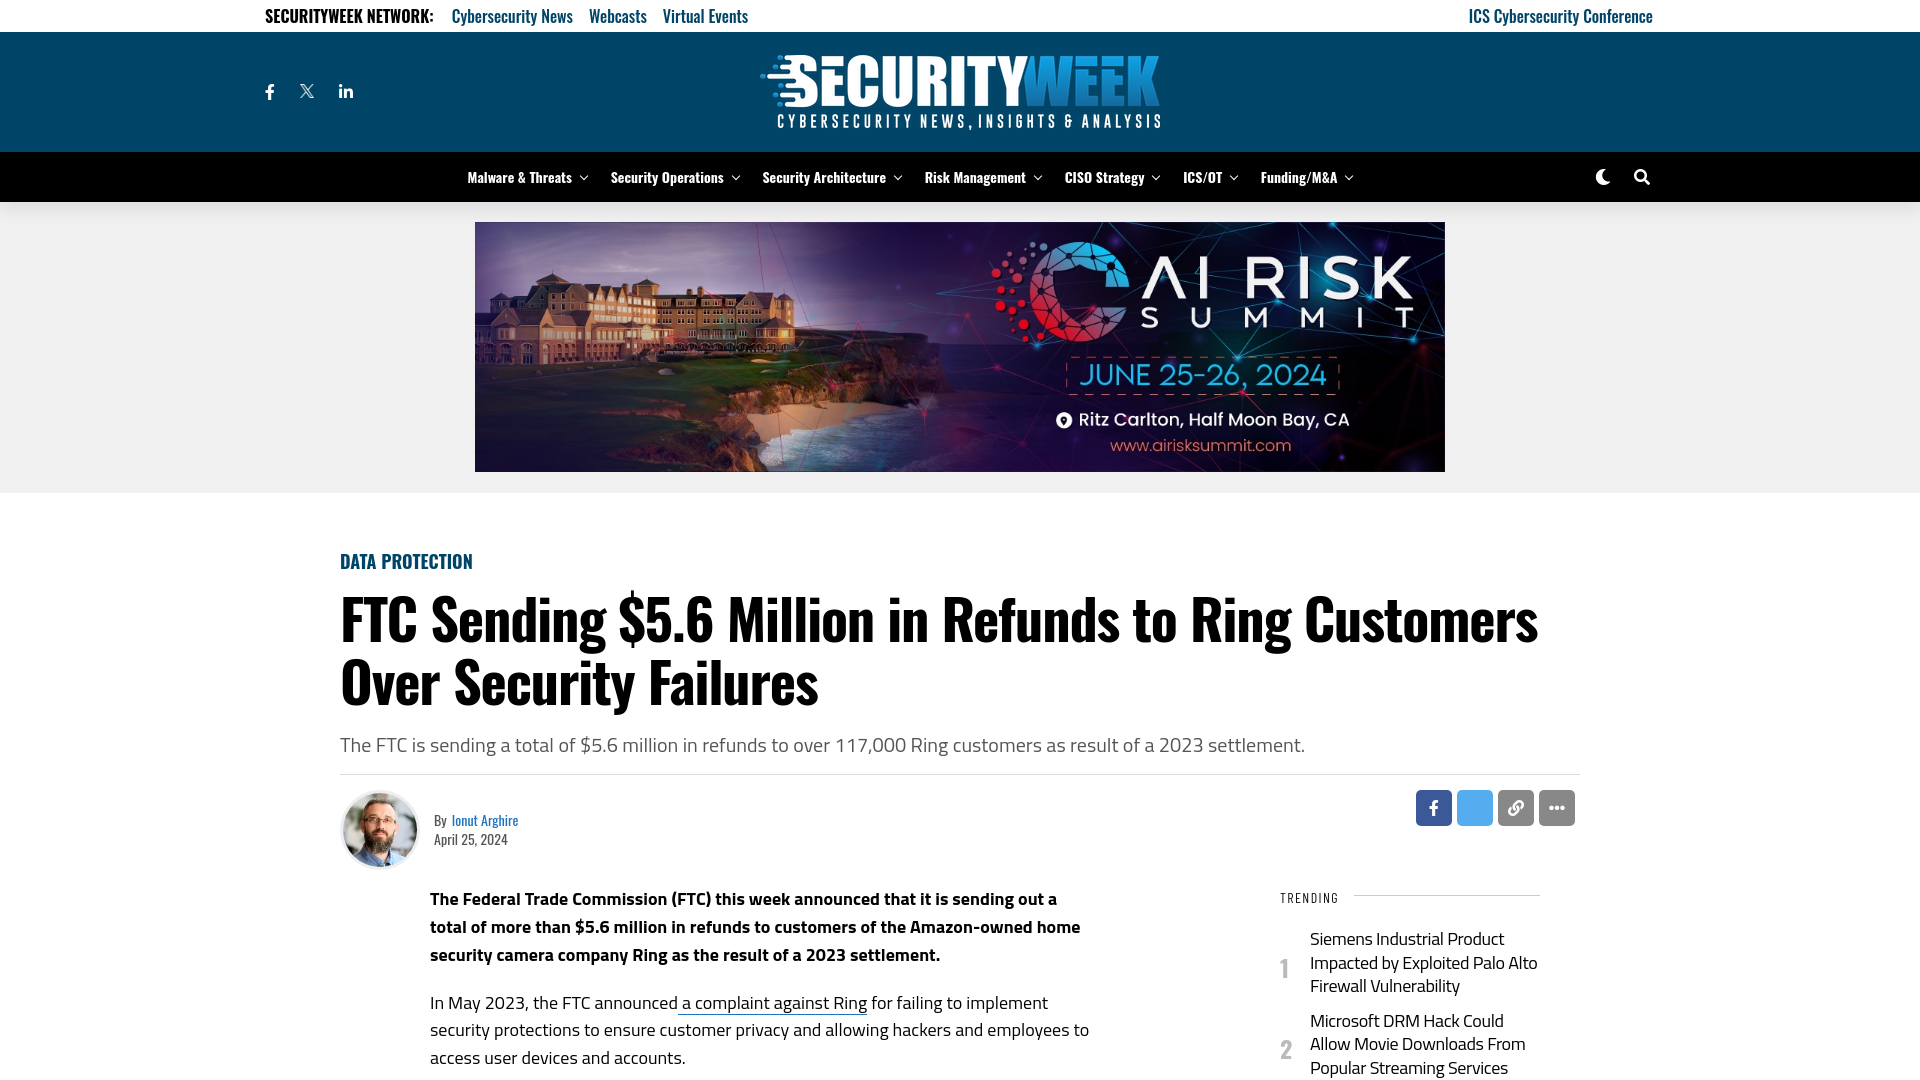 FTC Sending $5.6 Million in Refunds to Ring Customers Over Security Failures - SecurityWeek